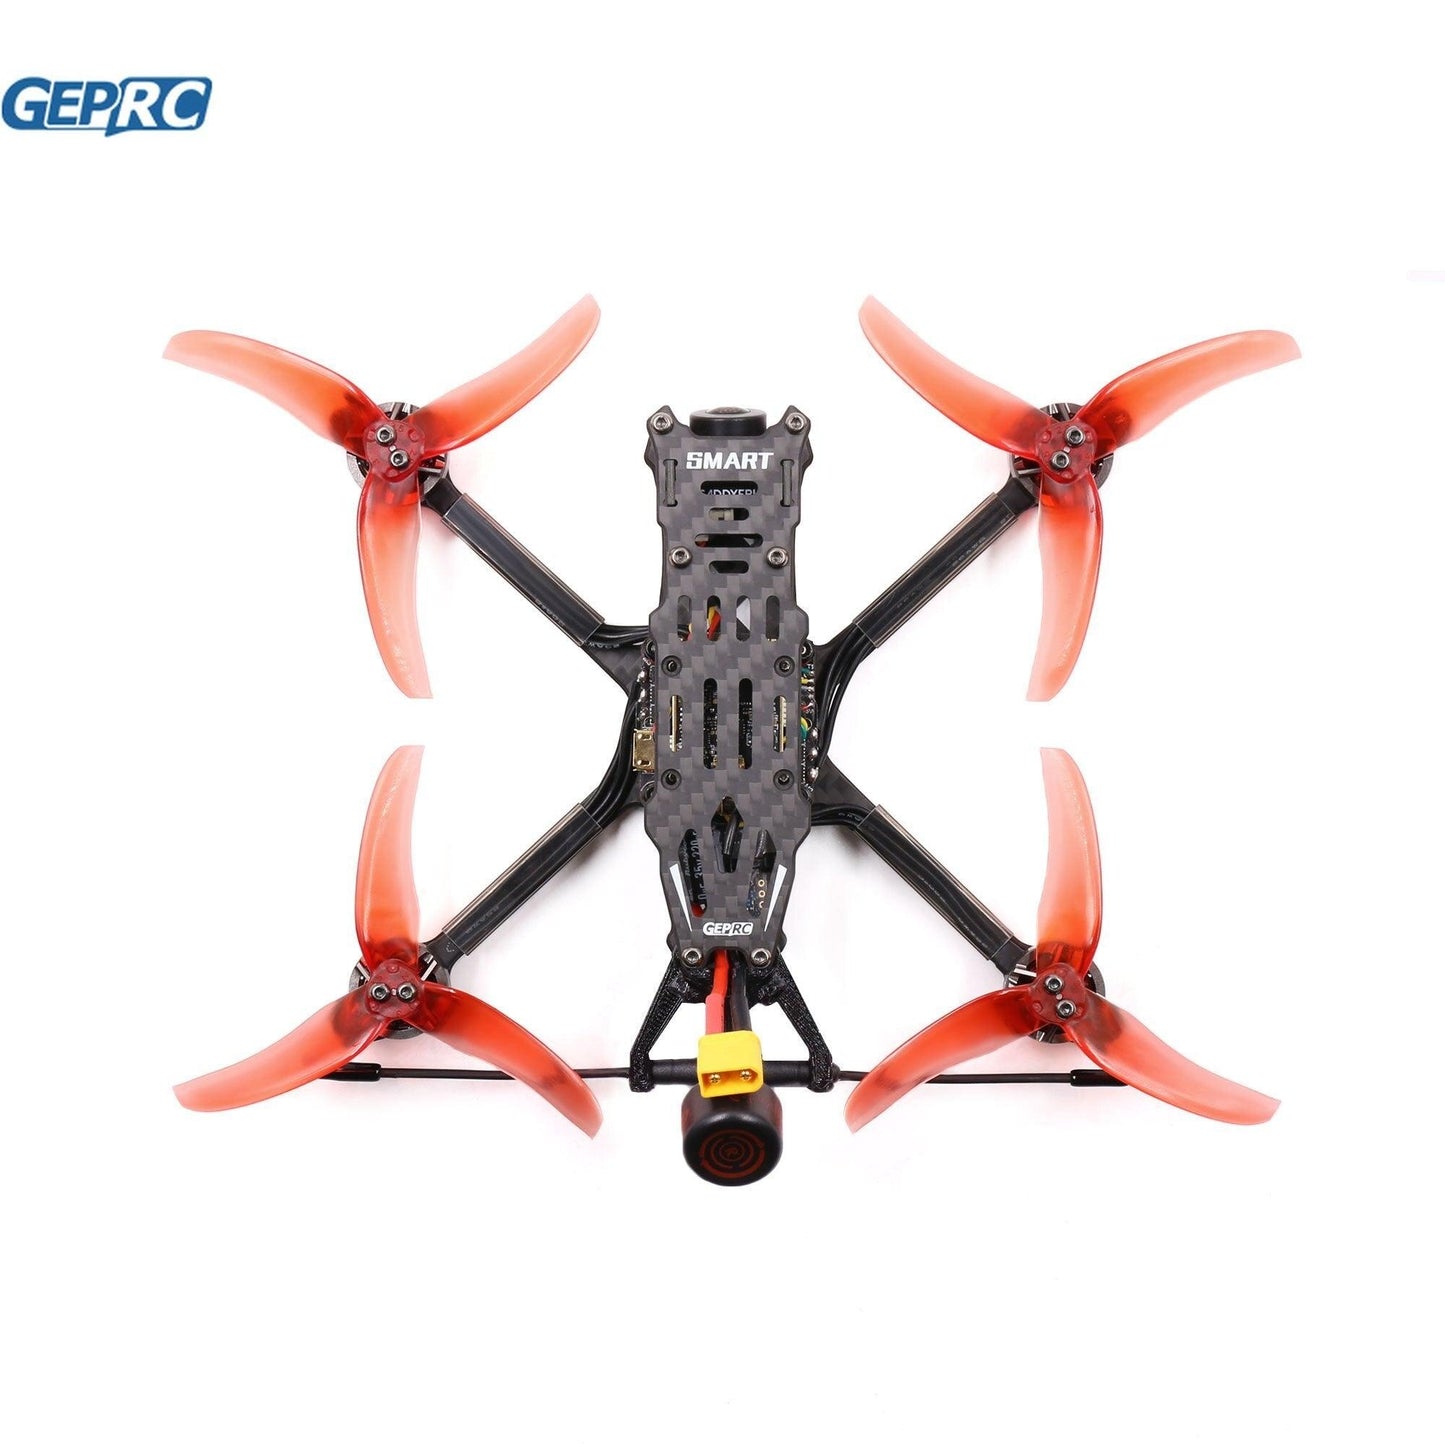 GEPRC SMART 35 FPV Drone - Analog 3.5inch Micro Freestyle Drone Caddx Ratel V2 Camera GR1404 3850KV For RC FPV Lightweight Quadcopter Drone - RCDrone